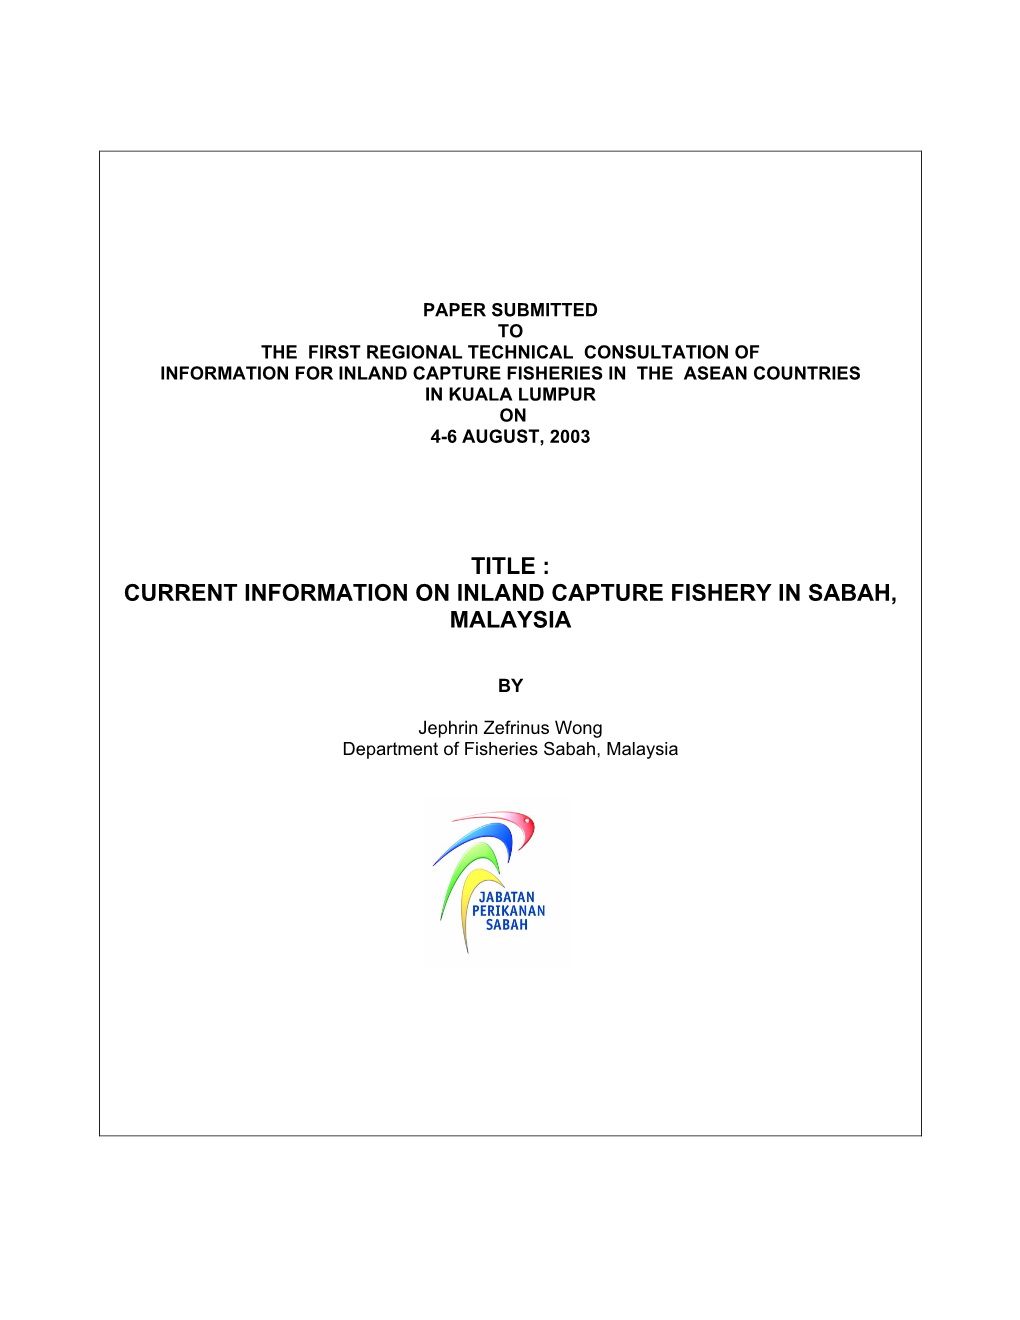 Title : Current Information on Inland Capture Fishery in Sabah, Malaysia